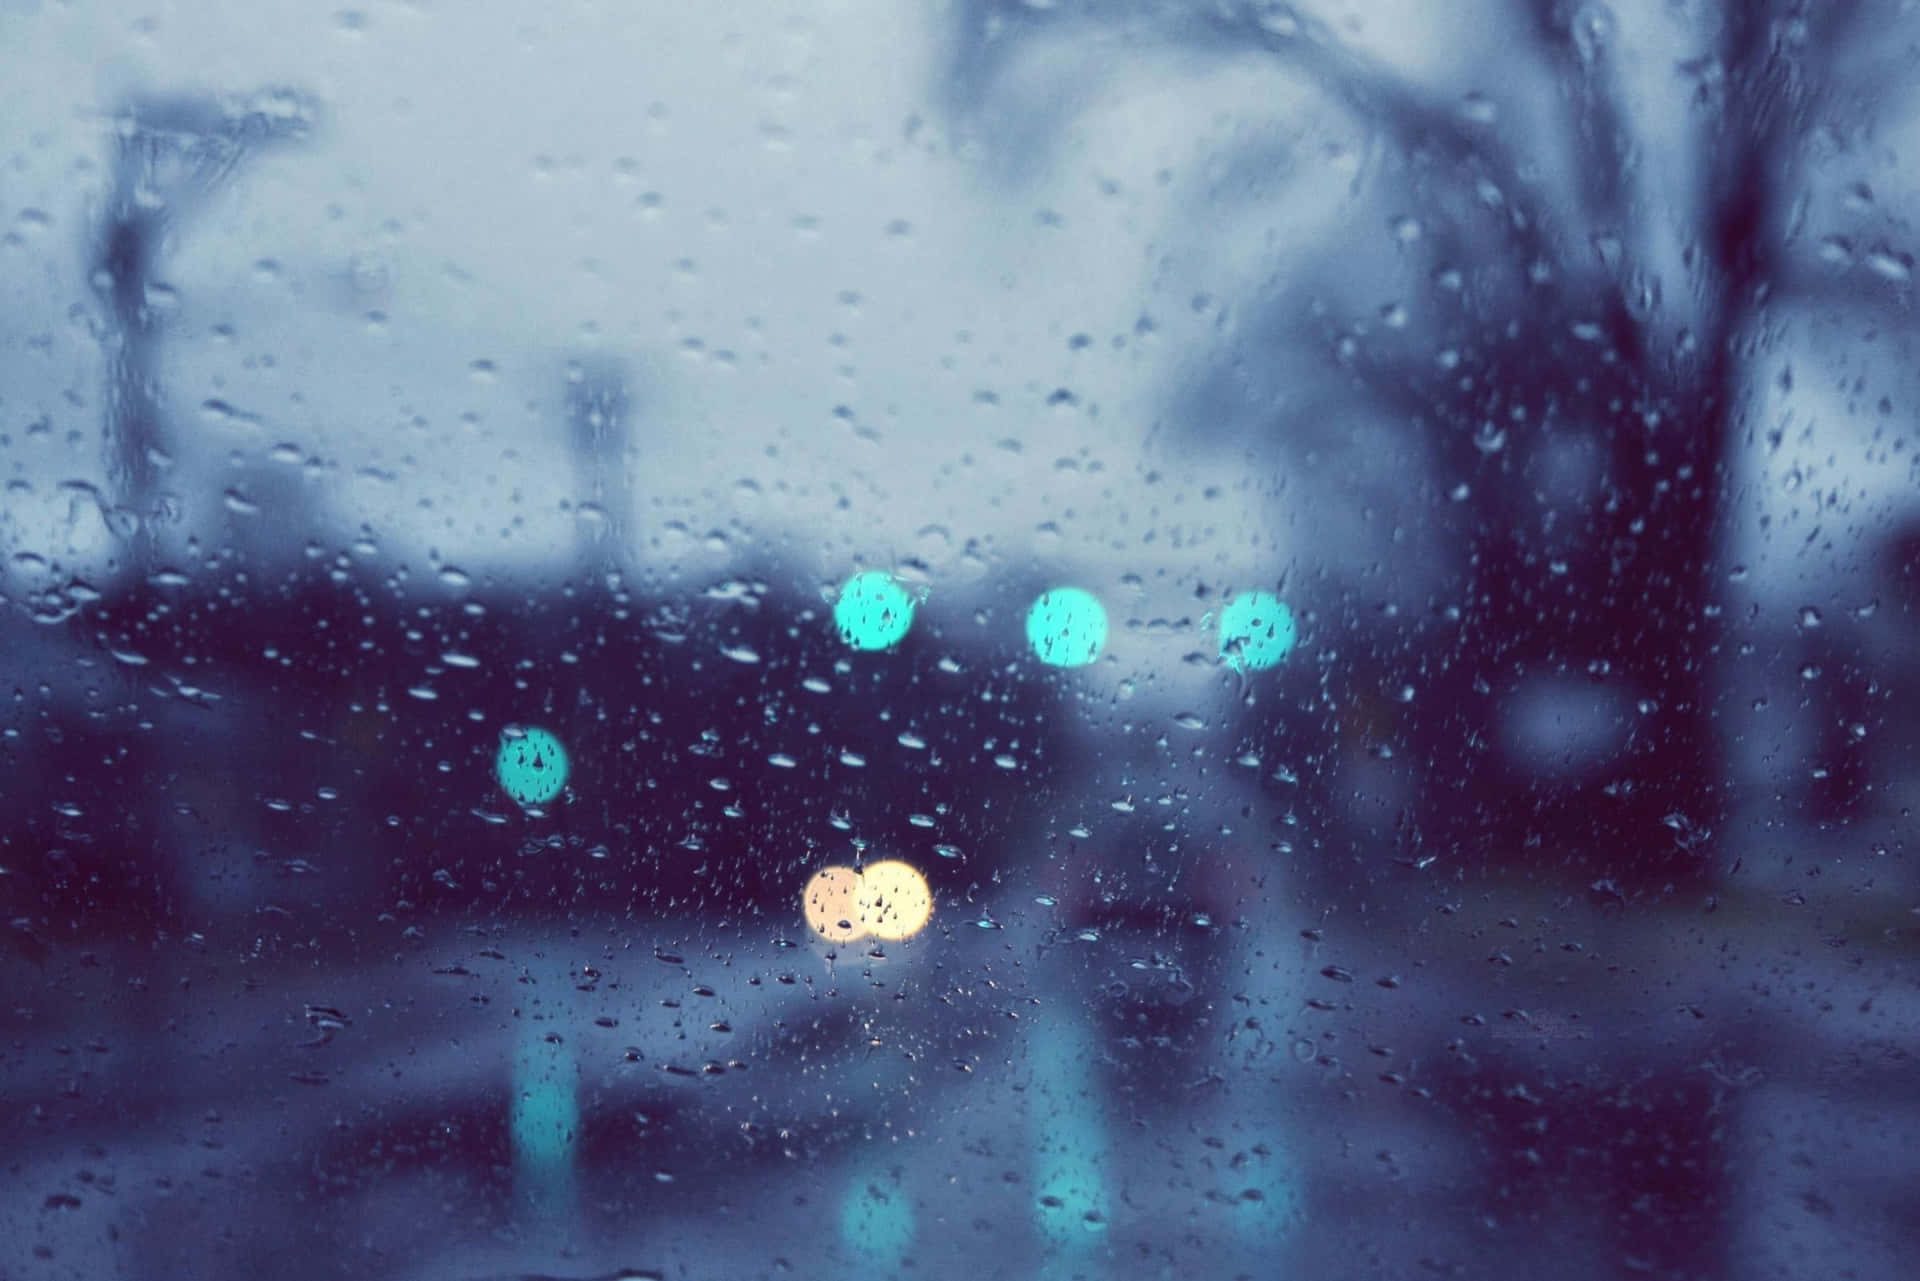 rainy weather wallpapers hd